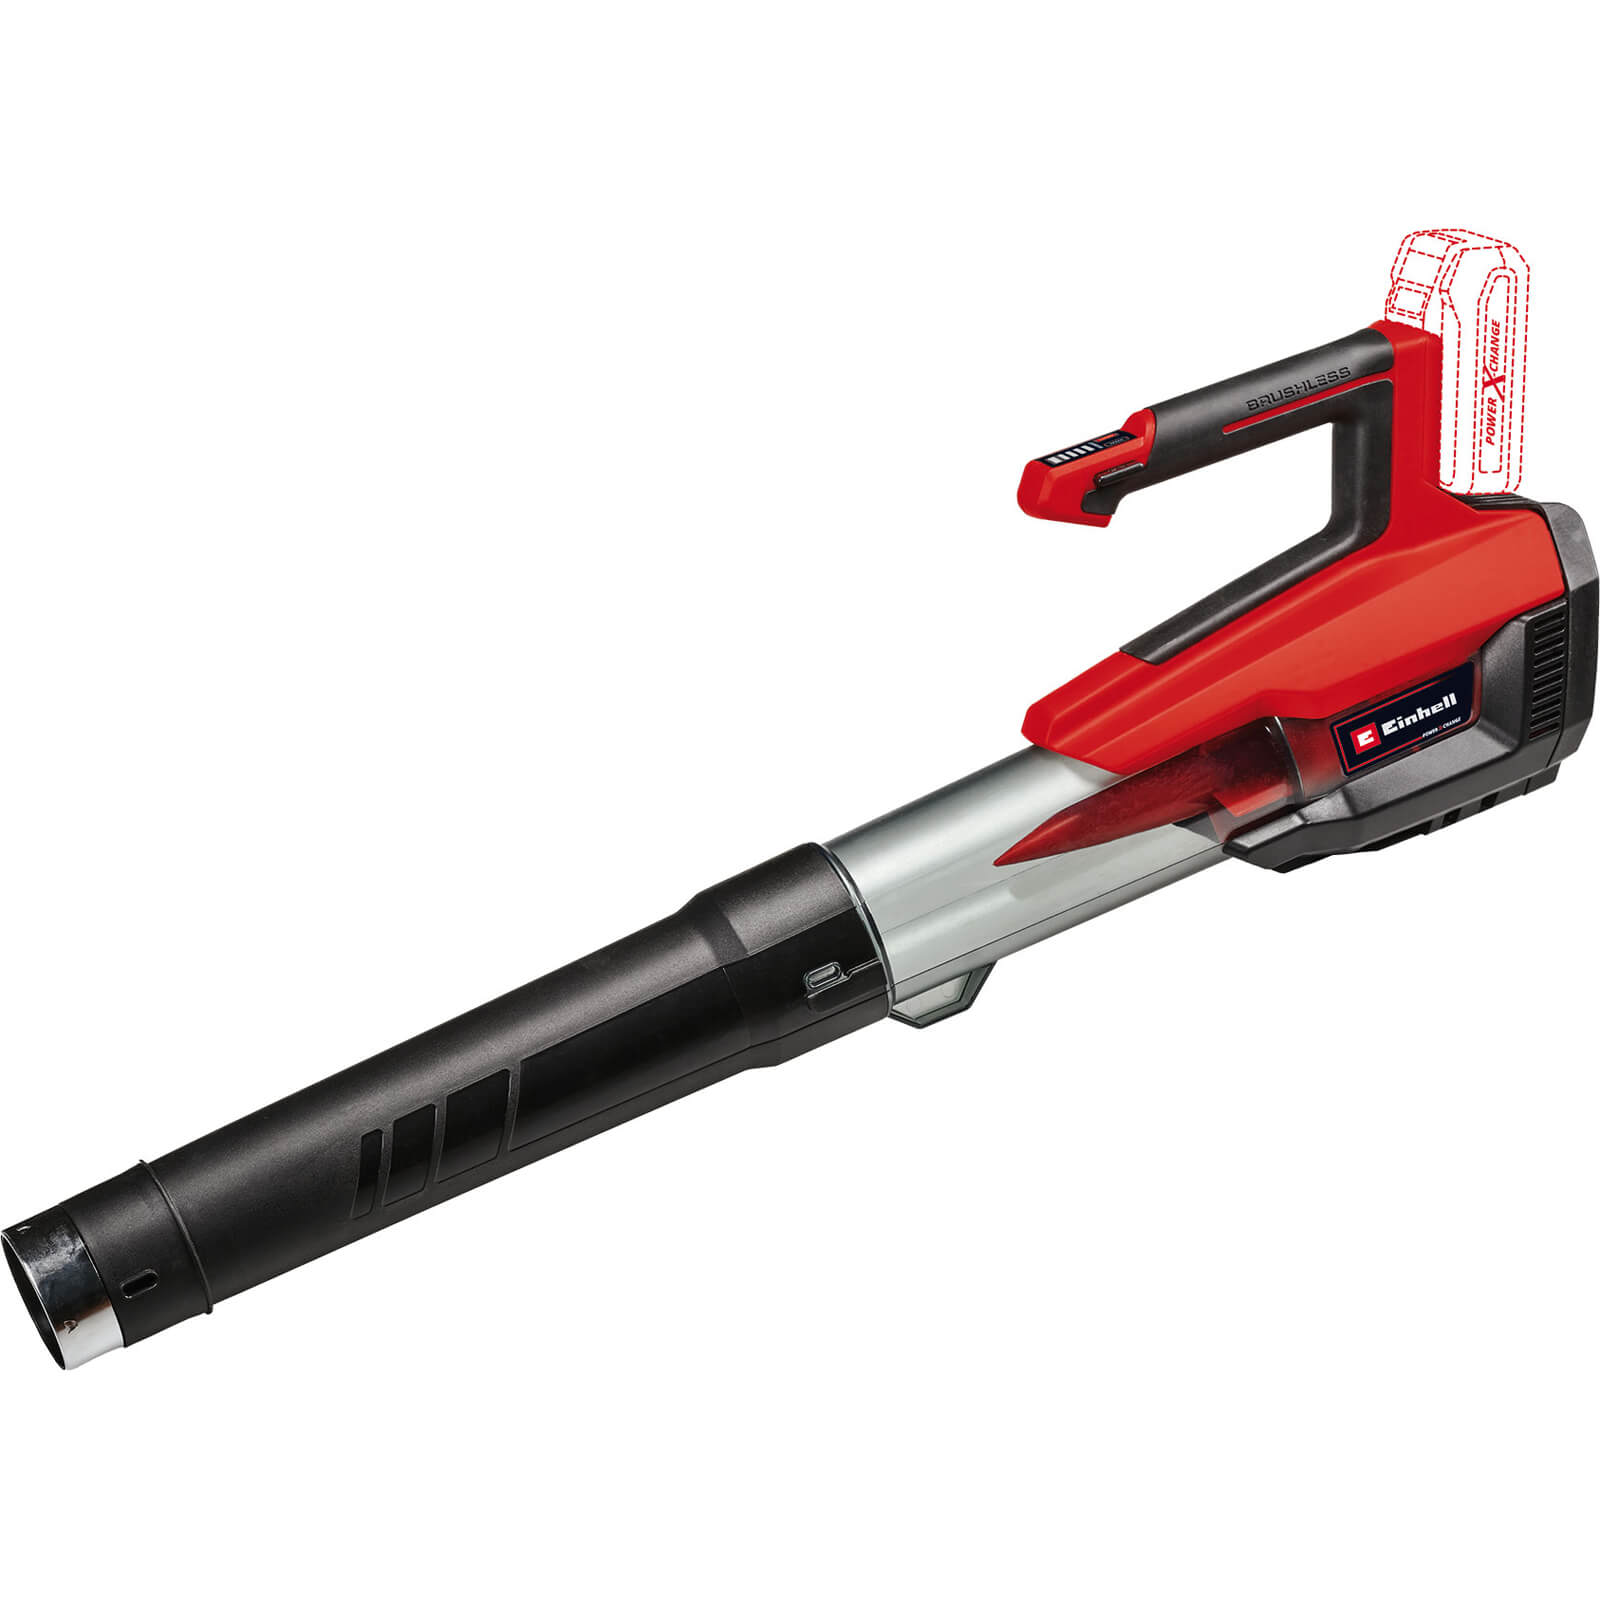 Image of Einhell GE-LB 18/200 Li E 18v Cordless Brushless Axial Leaf Blower No Batteries No Charger